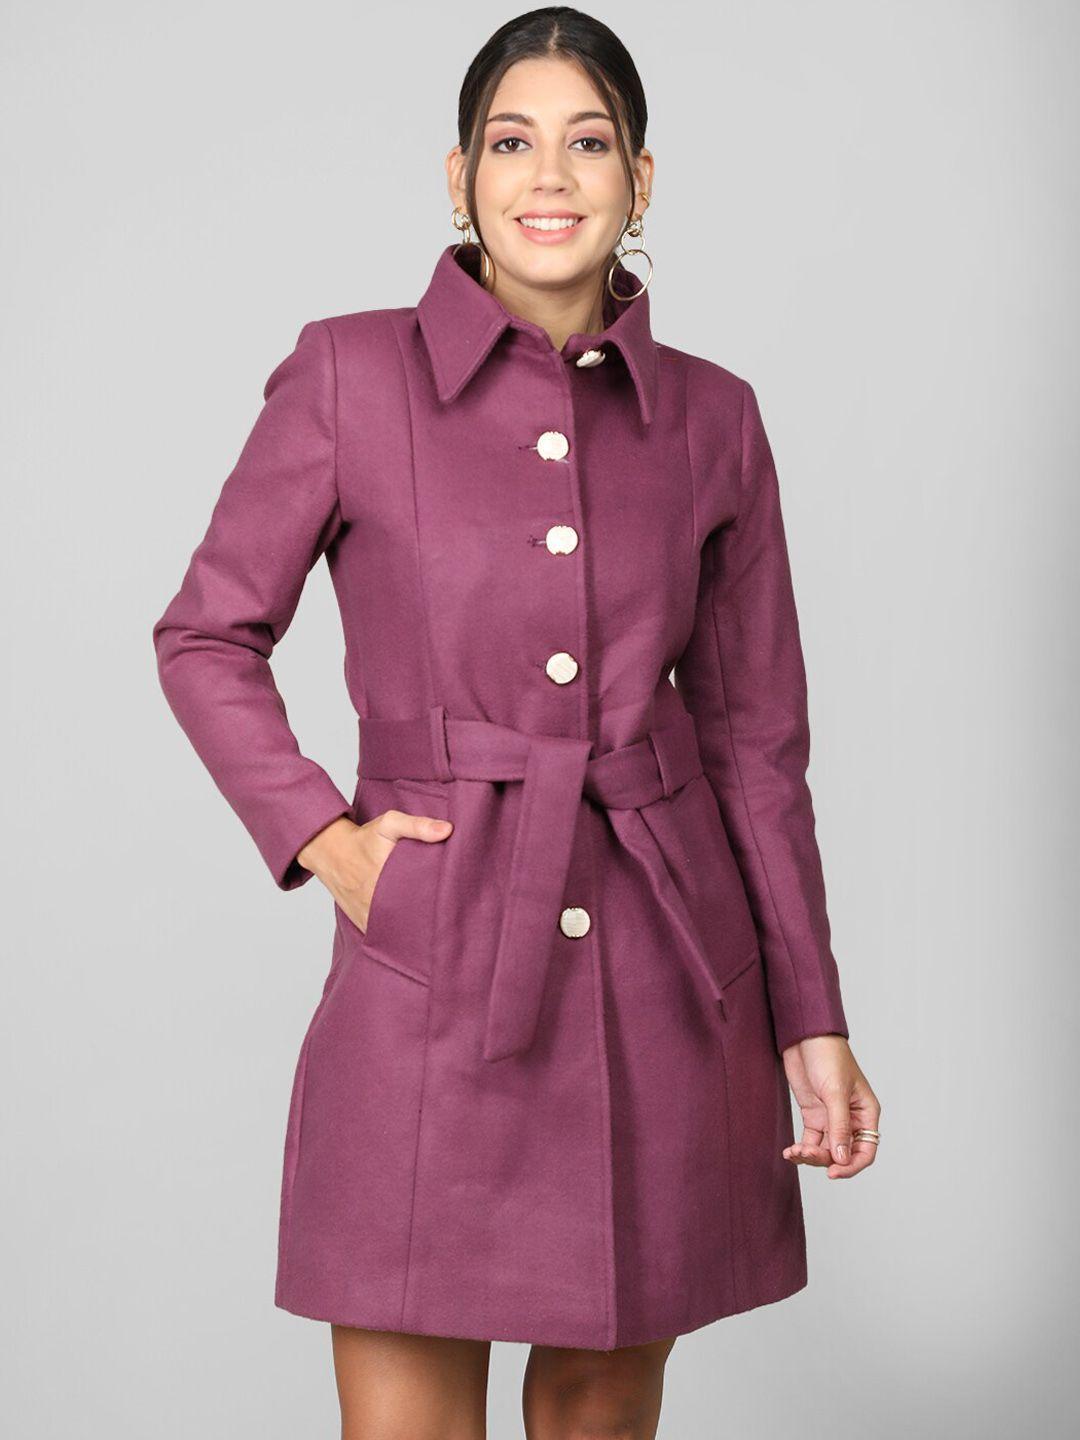 dlanxa belted waist single breasted wool trench coat